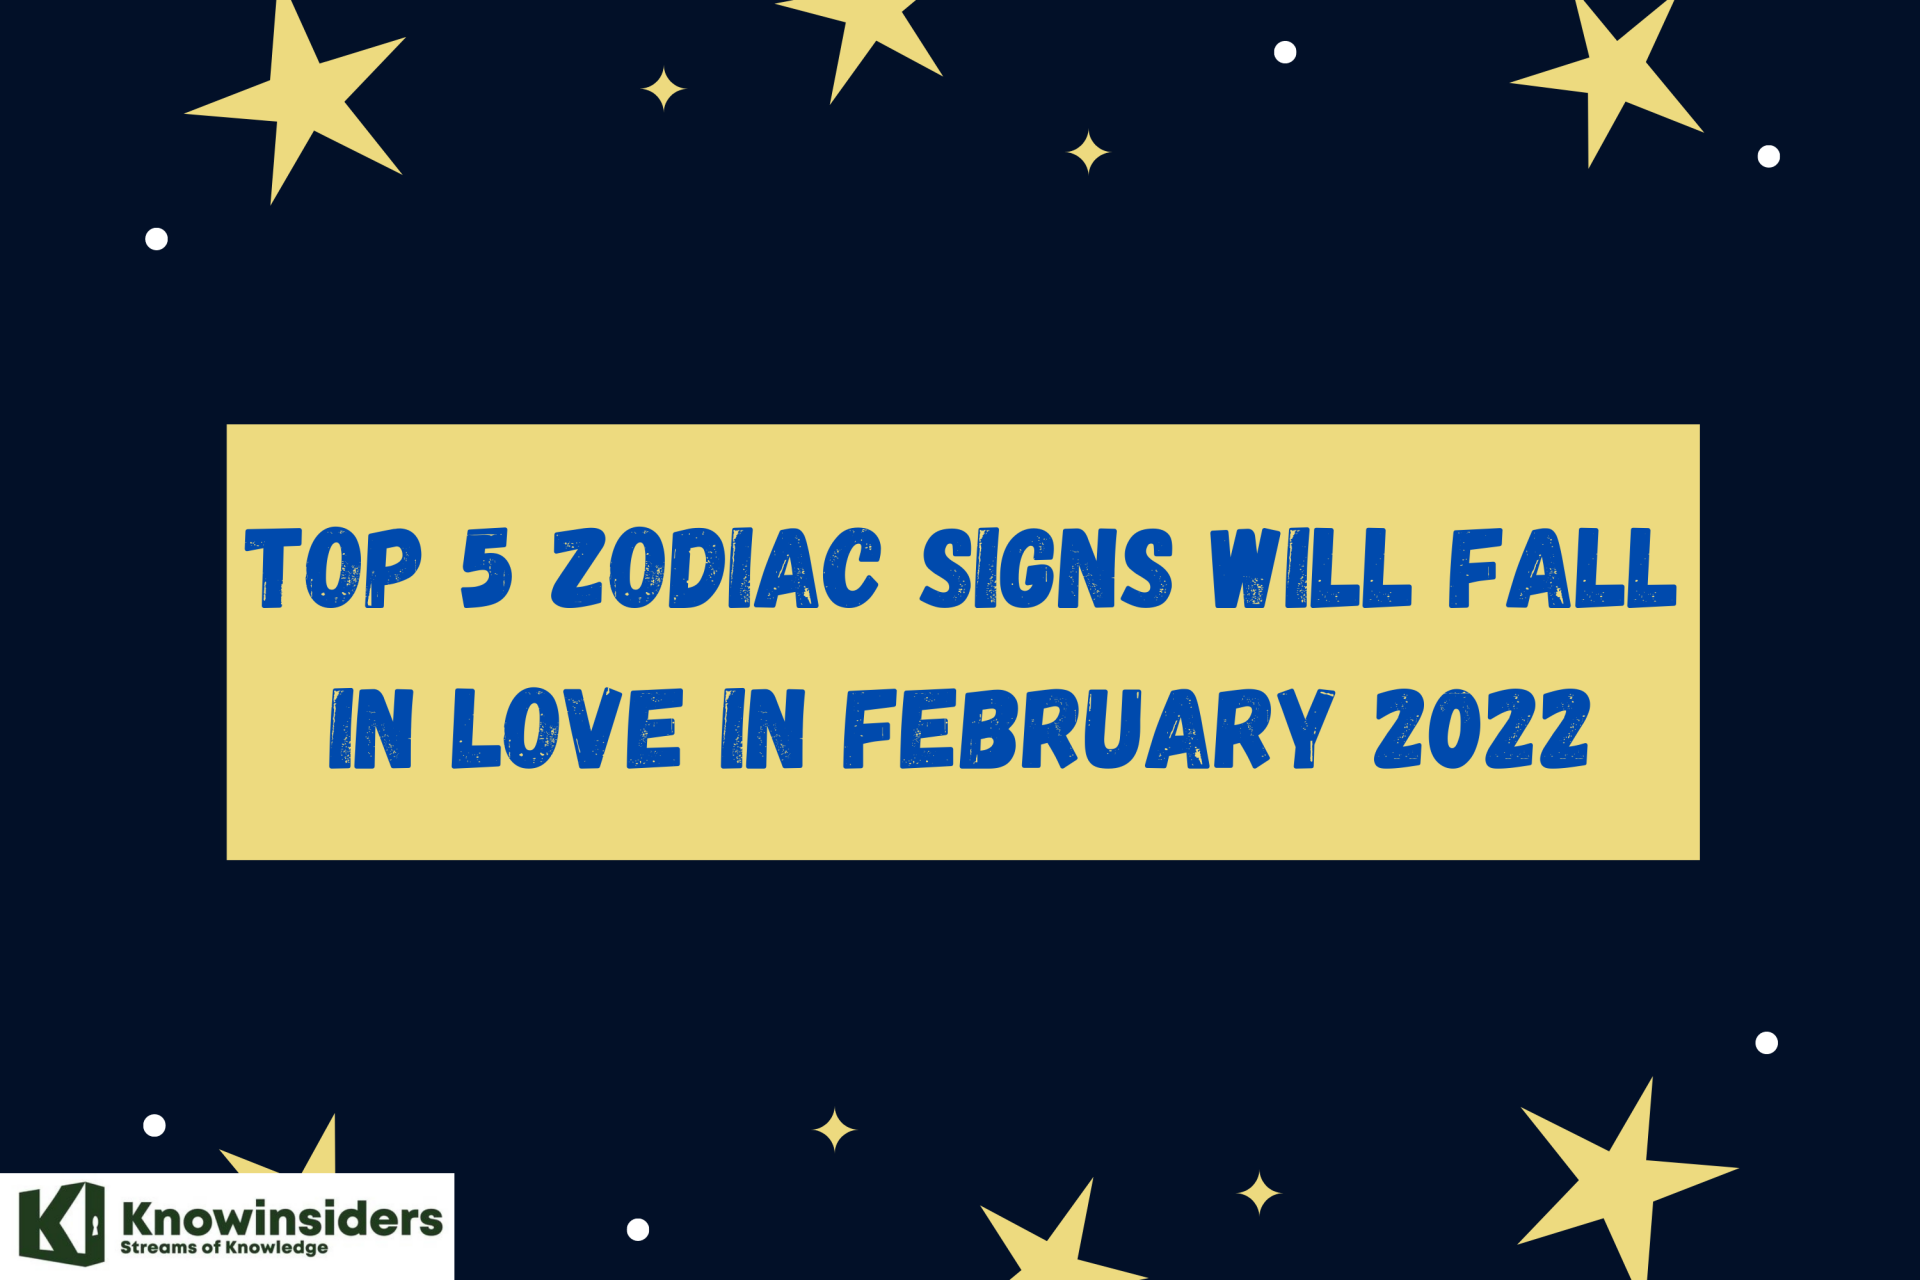 Top 5 Zodiac Signs Will Fall In Love In February 2022